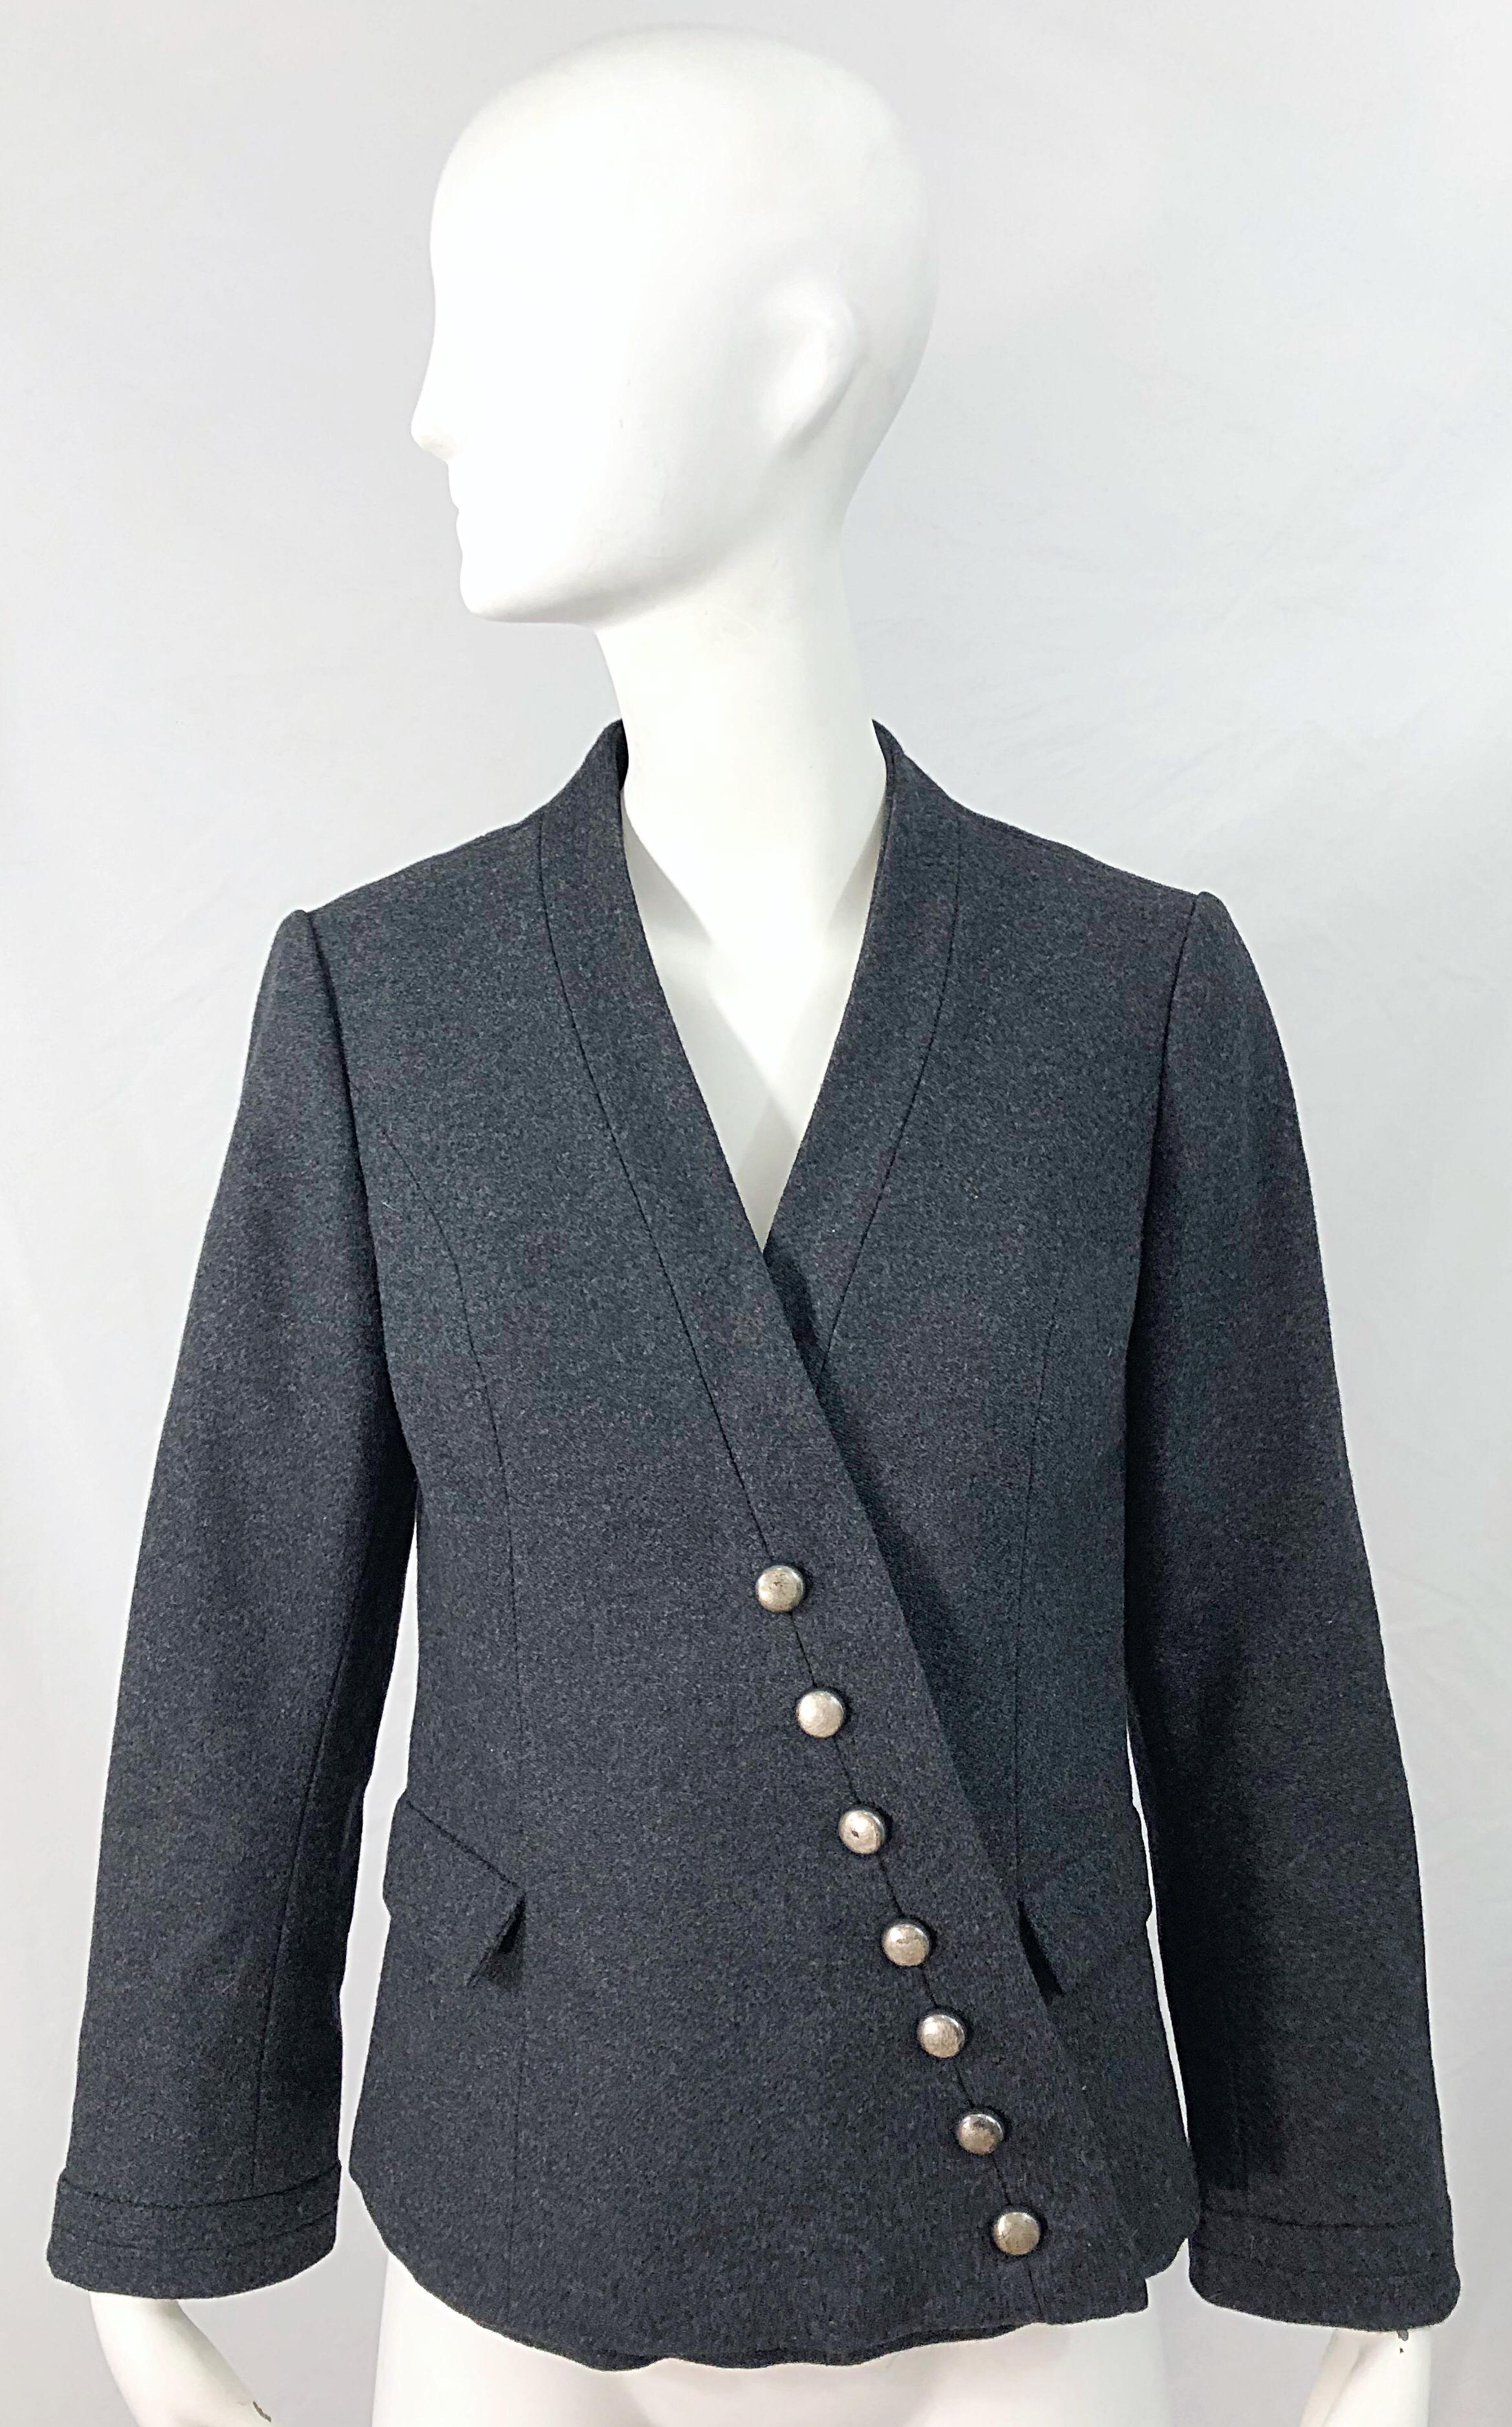 The perfect jacket ! This 1950s mid century HELEN ROSE jacket has it all--style, practicality, warmth, etc. ! Perfect alternative to a black jacket. Soft wool that is great for anytime of year. Silver nickel polished buttons up the front. Fully